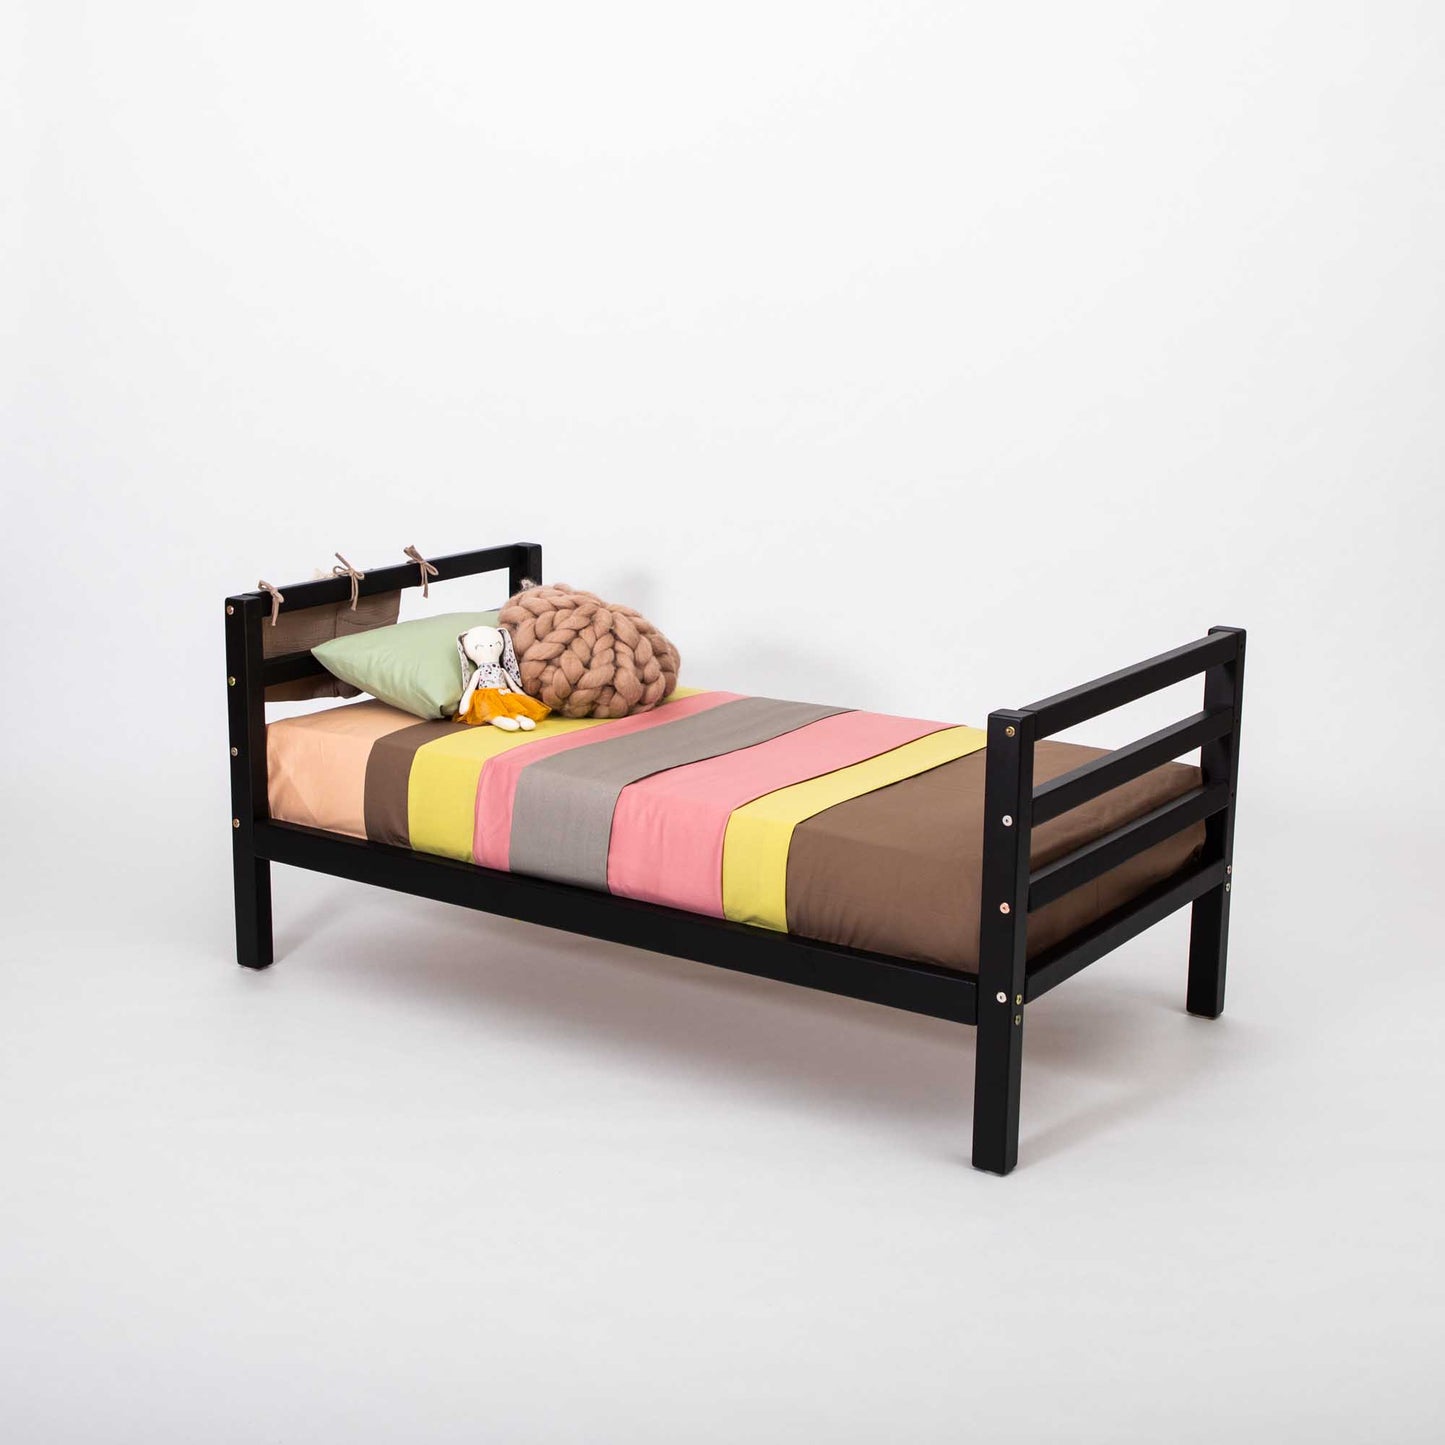 A long-lasting 2-in-1 kids' bed with a black frame and colorful bedding that grows with the child from Sweet Home From Wood.